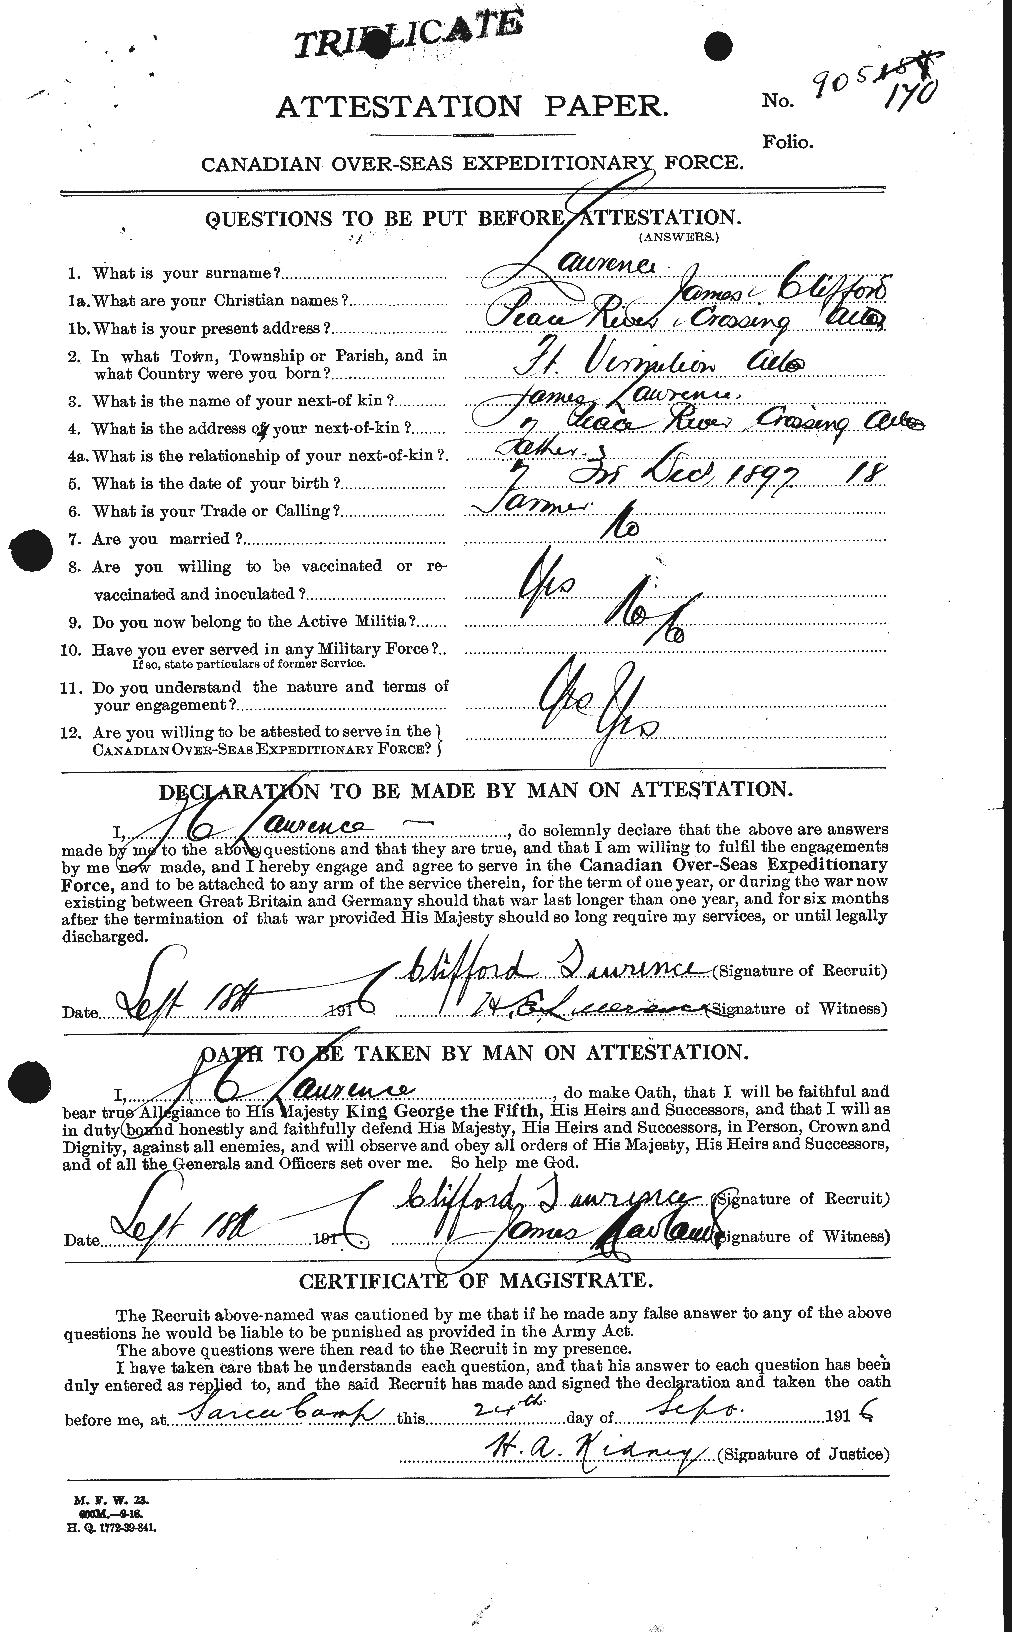 Attestation record: James Clifford Lawrence